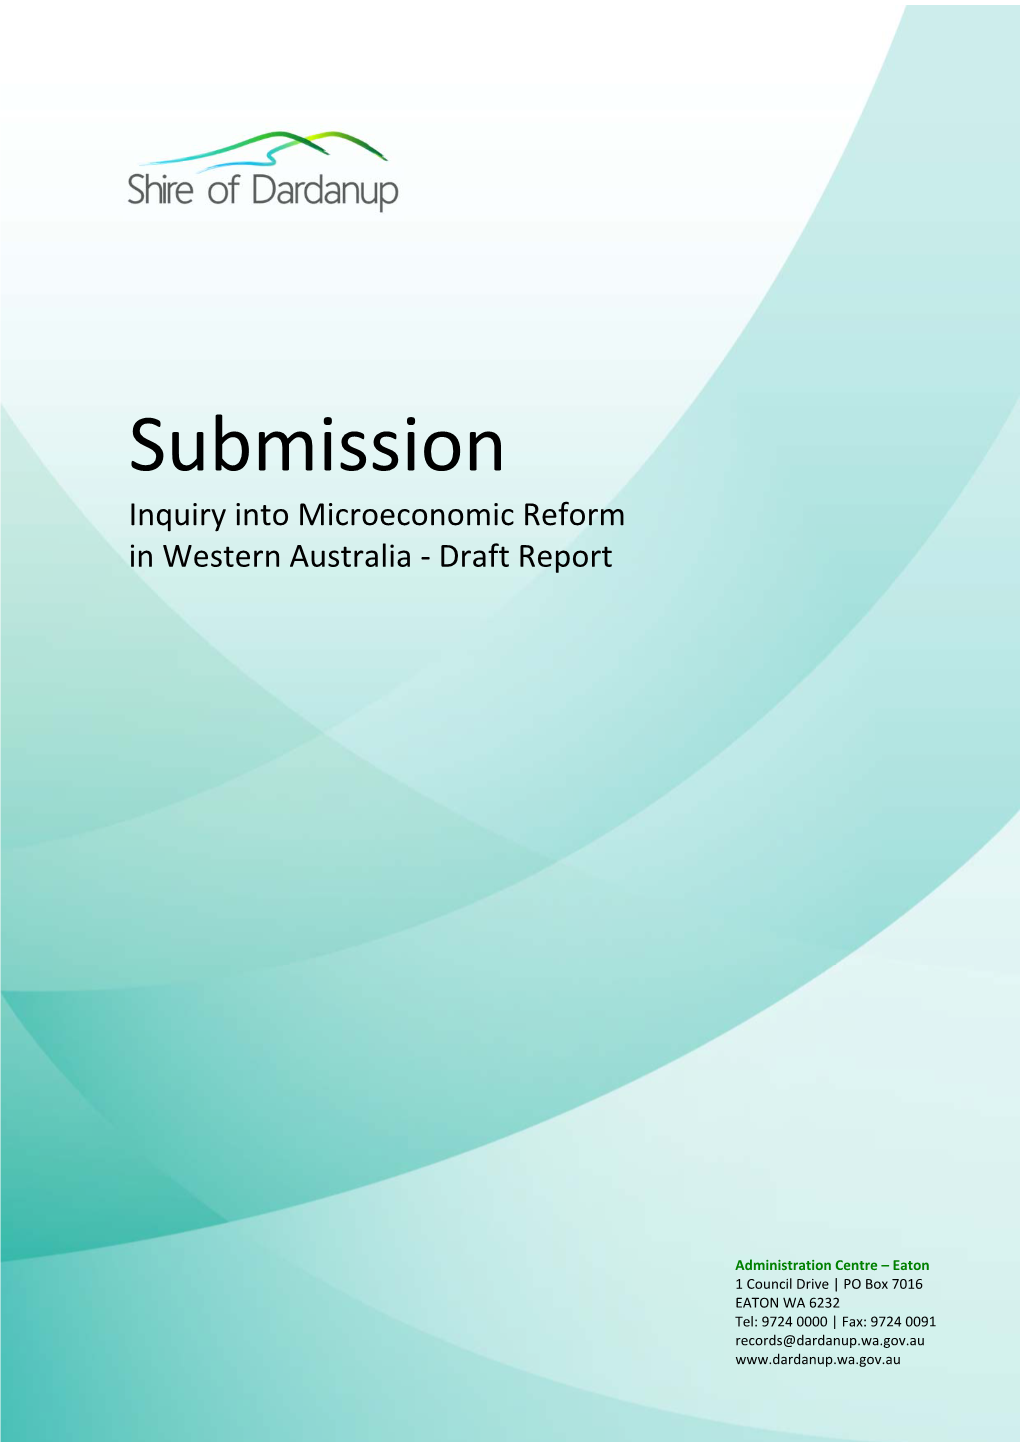 Submission Inquiry Into Microeconomic Reform in Western Australia ‐ Draft Report